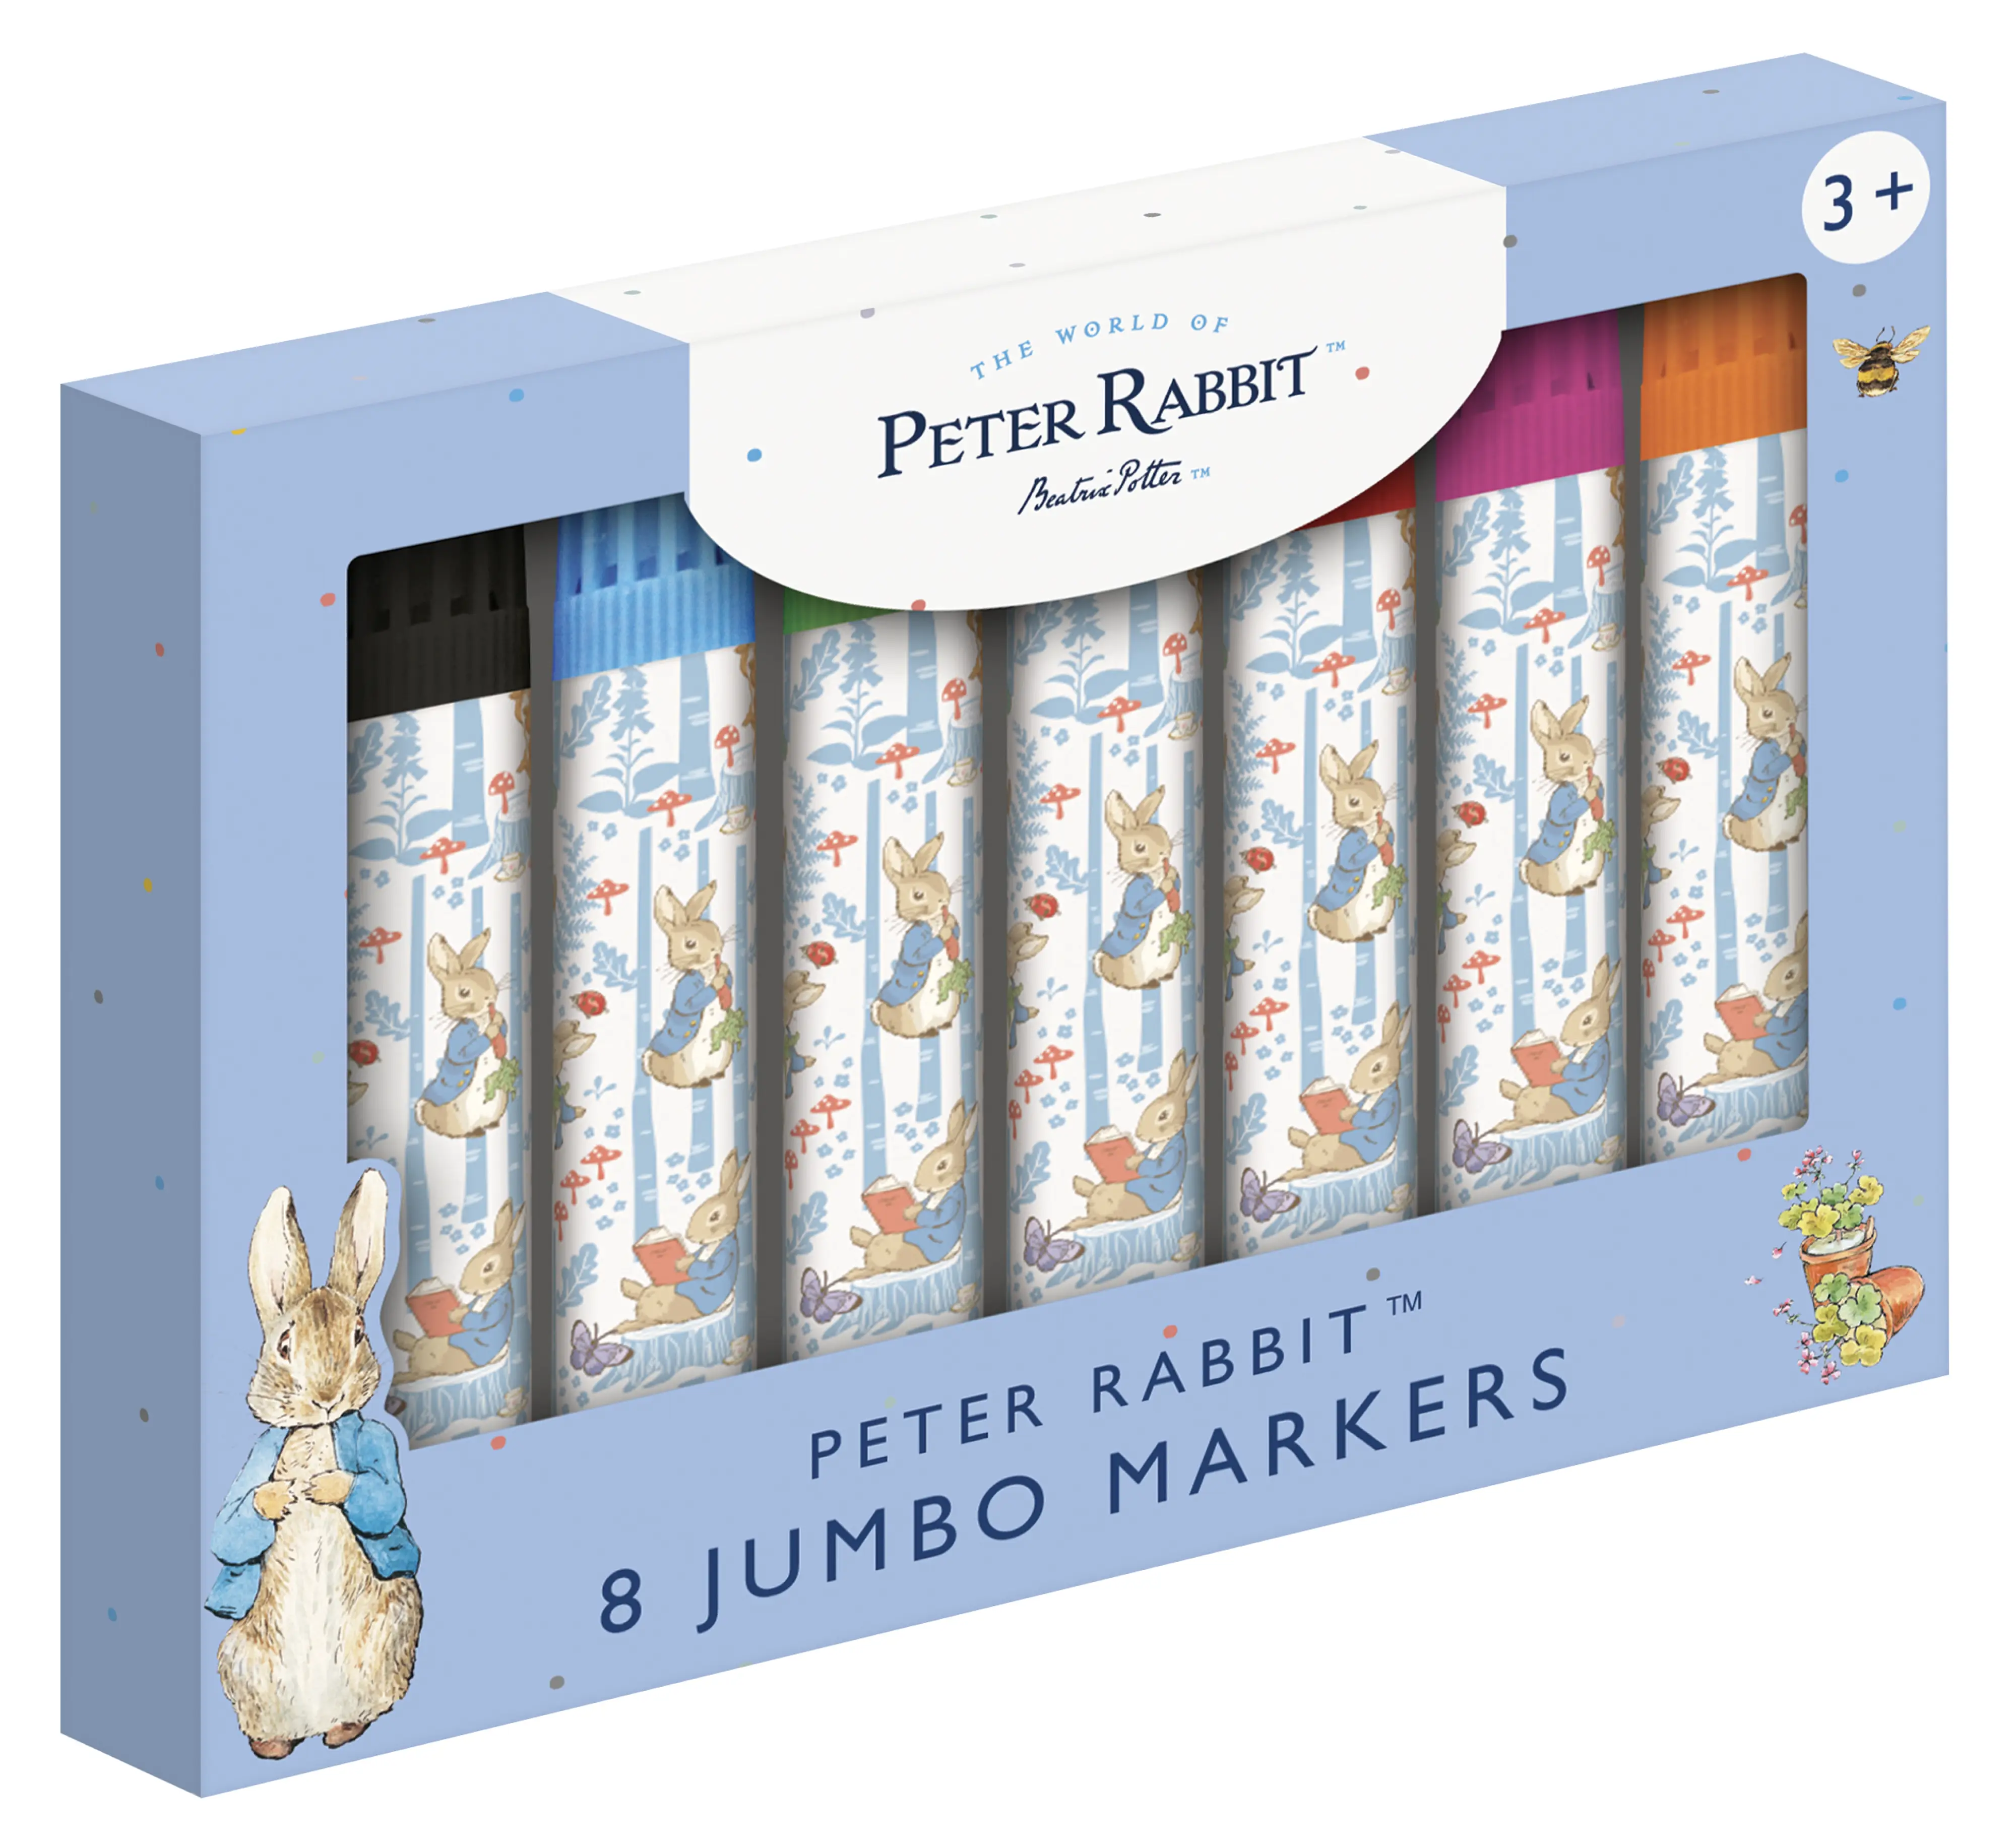 Peter Rabbit 8 Jumbo Markers Forest Picnic